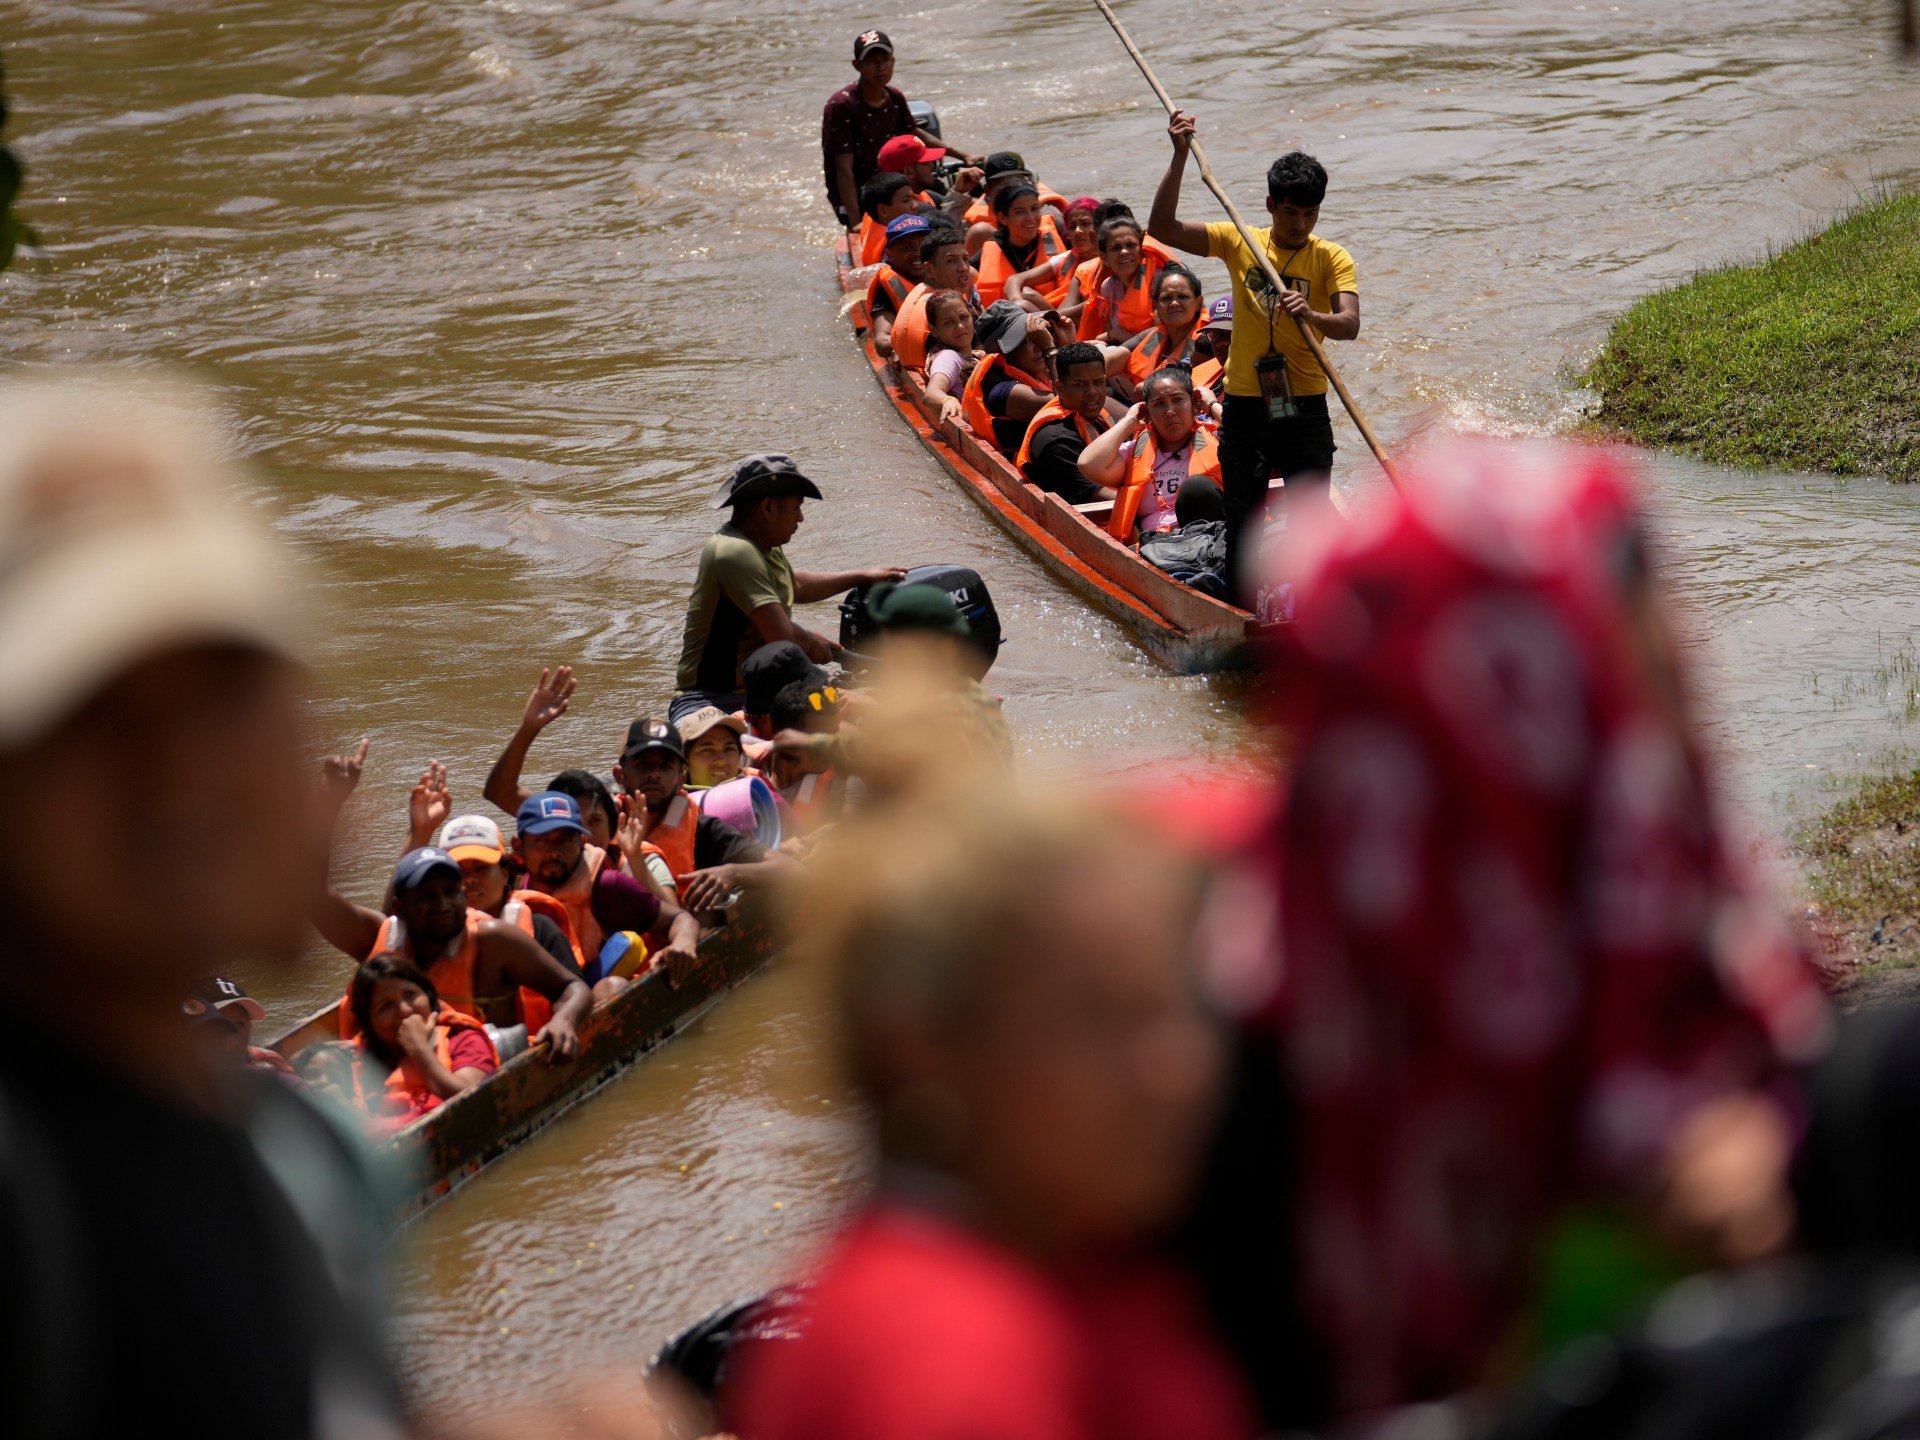 Ten people drown in Panama river as migration risks escalate